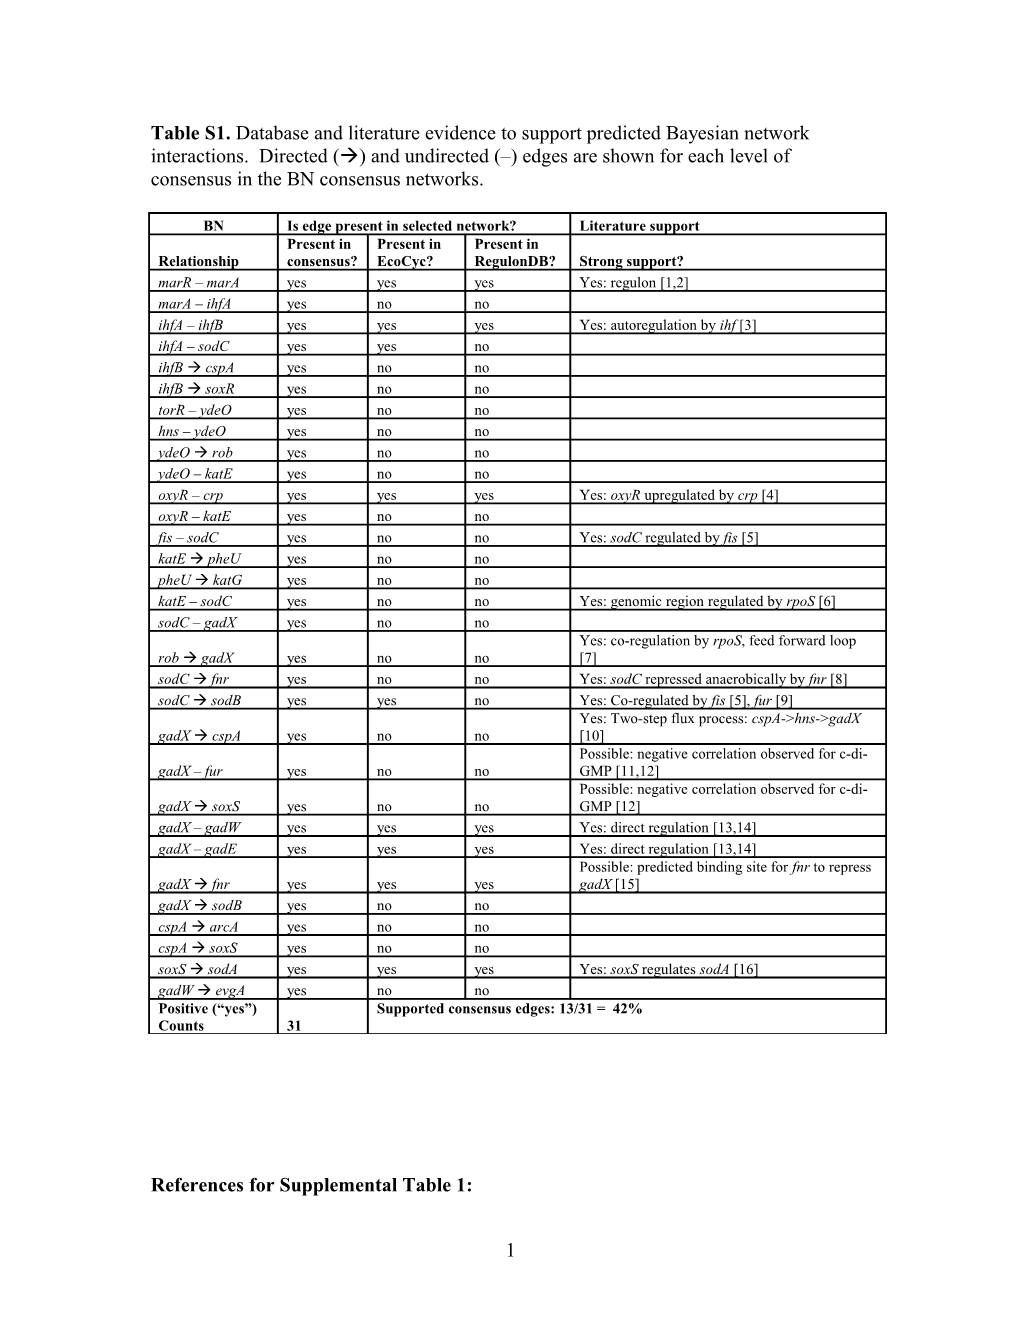 References for Supplemental Table 1